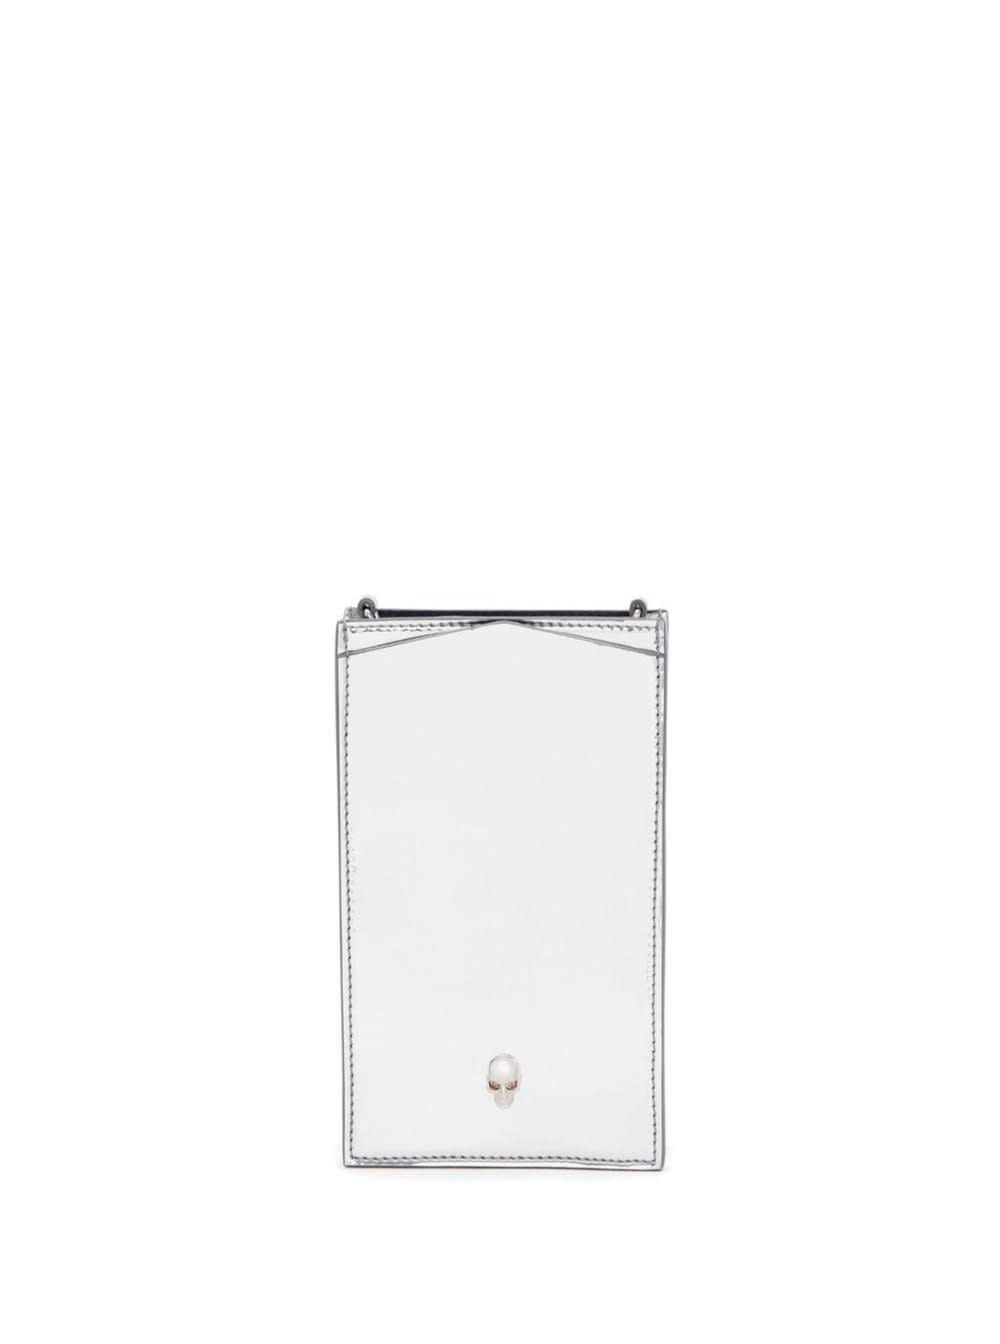 ALEXANDER MCQUEEN SILVER-COLORED PHOCE CASE WITH CHAIN AND SKULL DETAIL IN LAMINATED FAUX LEATHER WOMAN